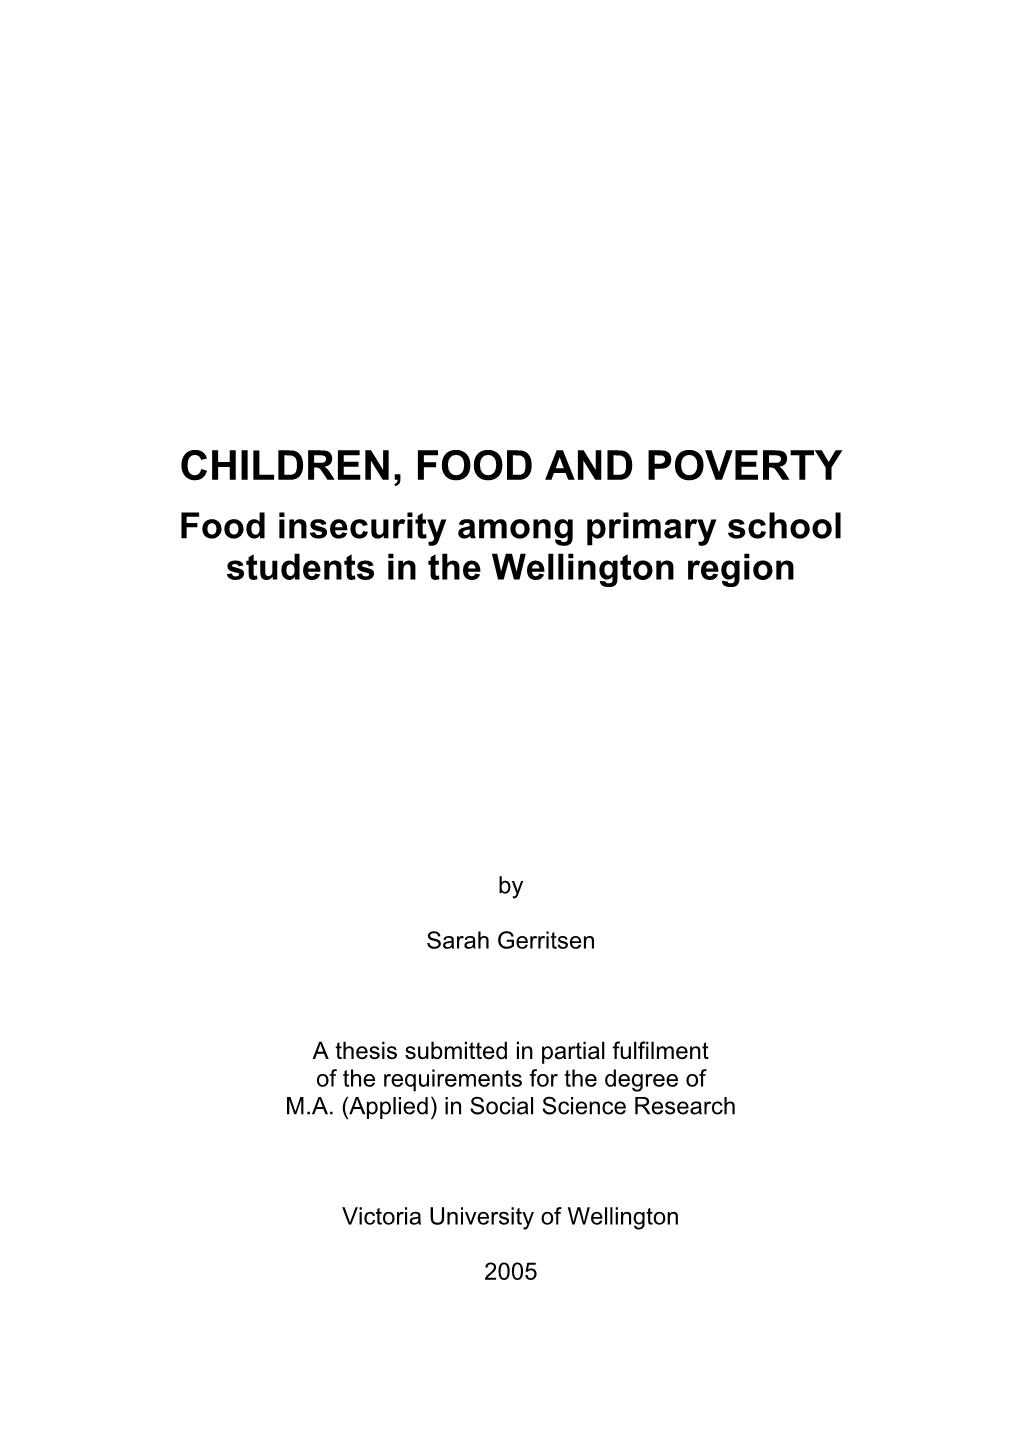 Children, Food and Poverty